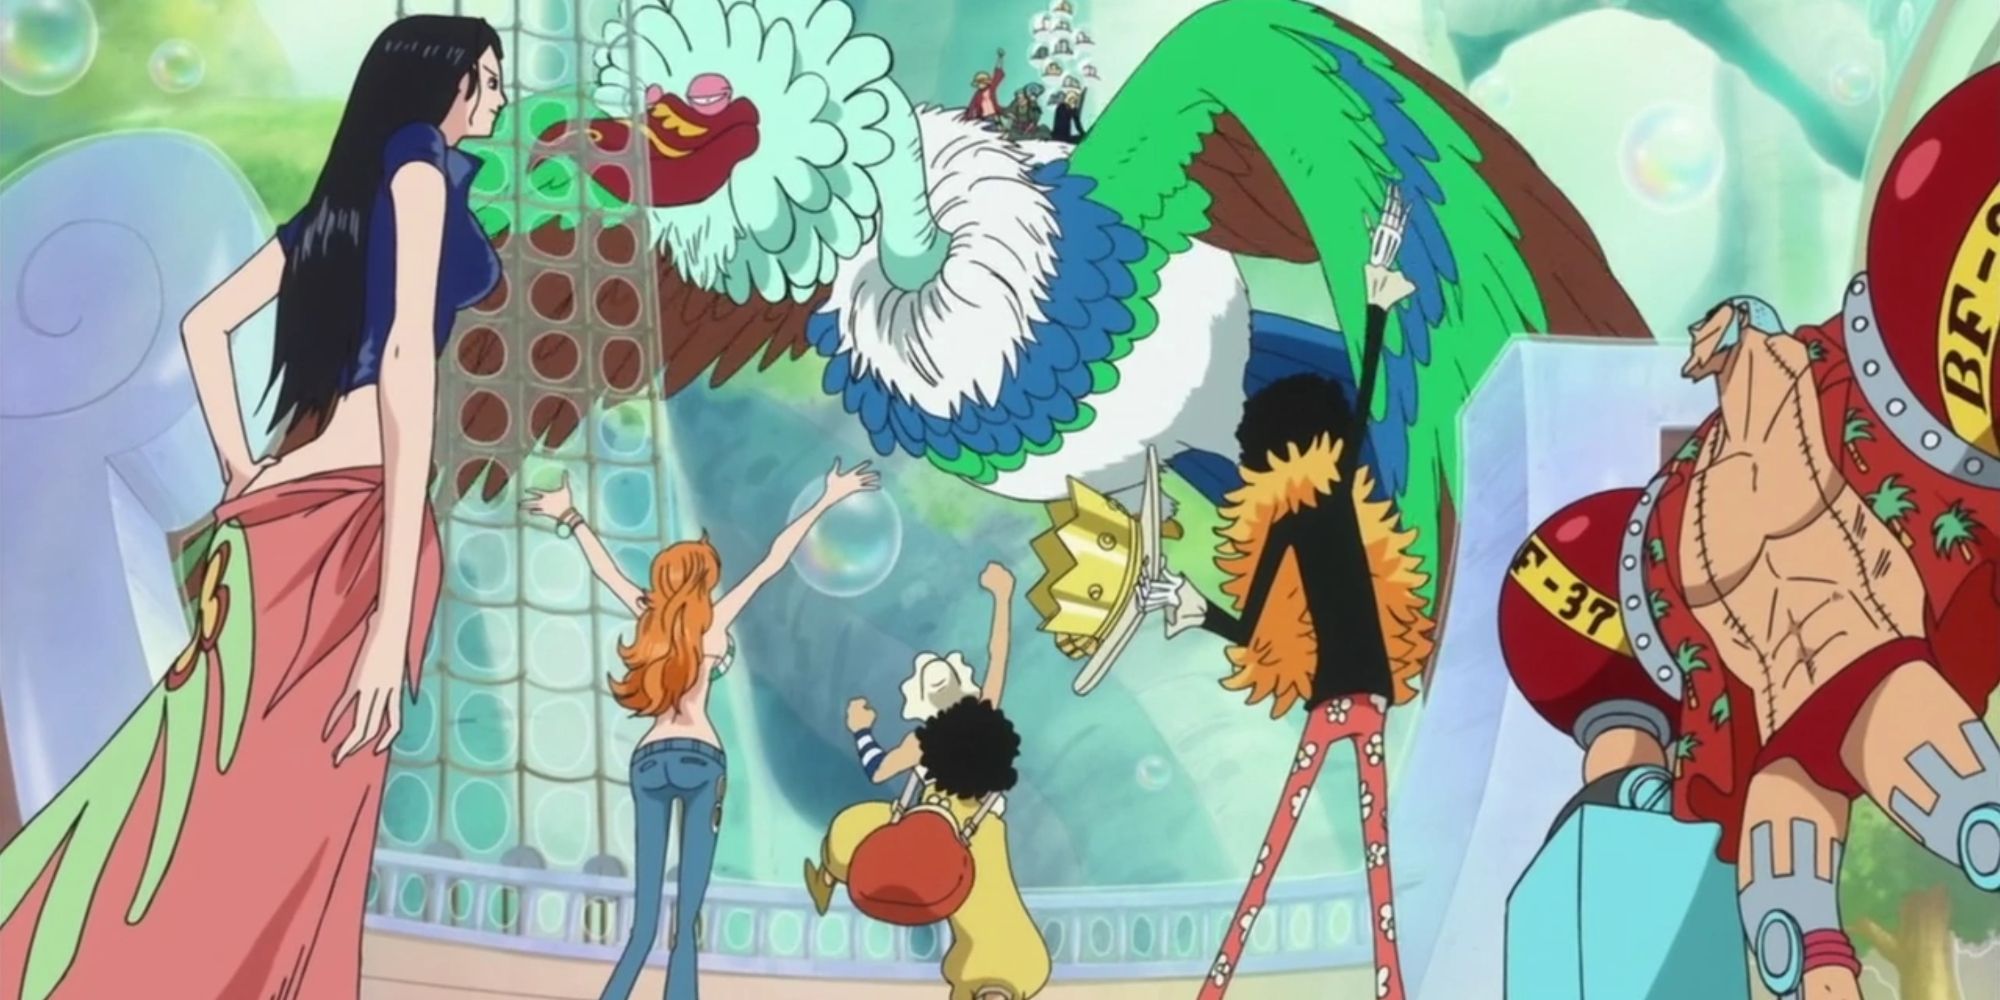 The Straw Hat Pirates reunited during the events of One Piece's return to Sabaody arc